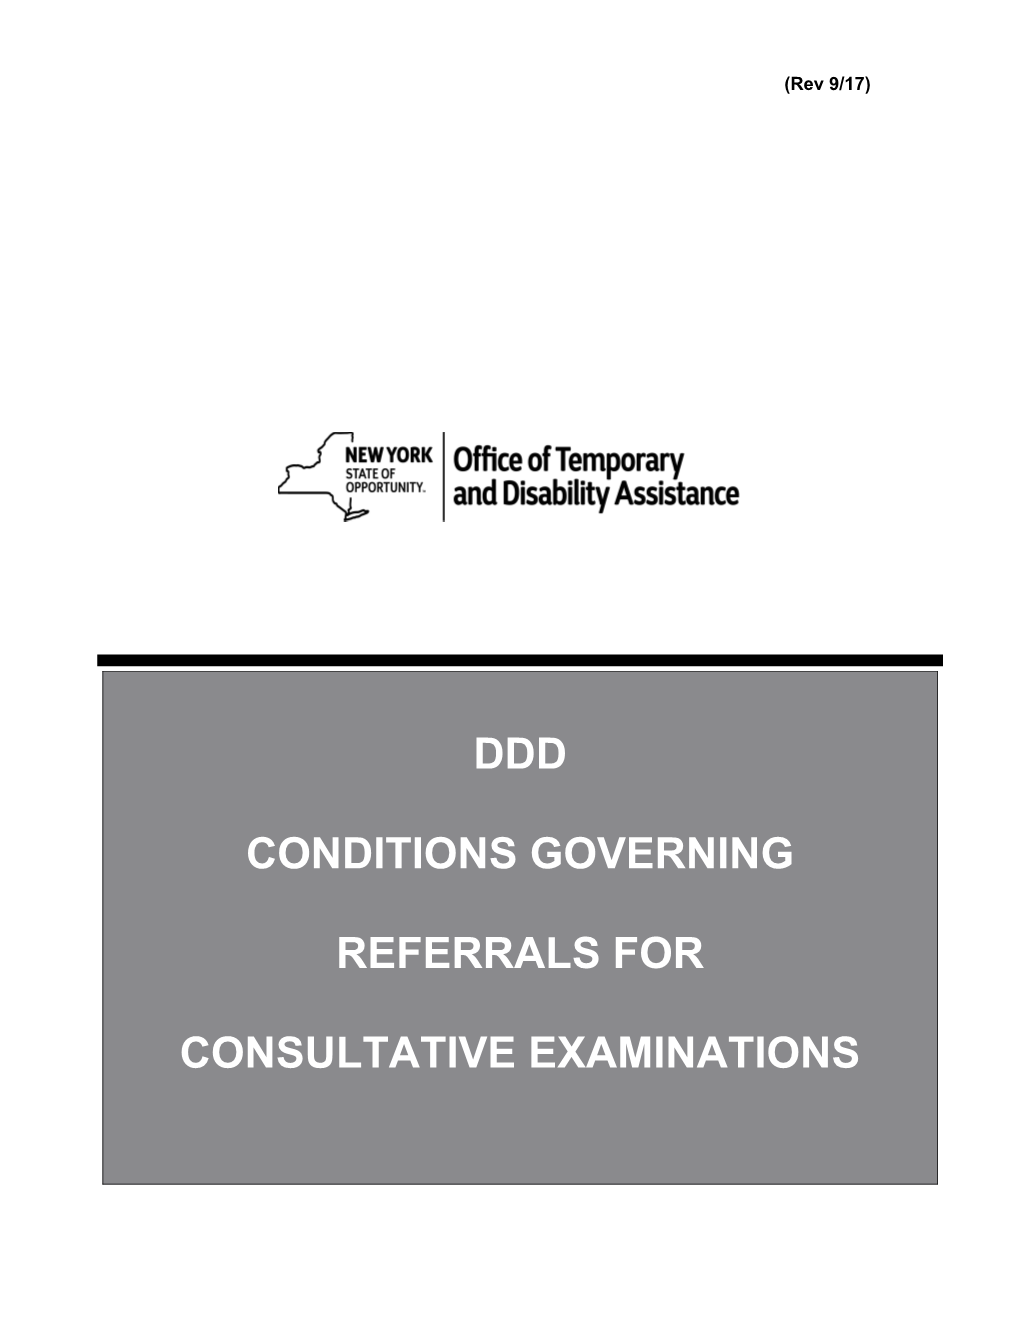 Conditions Governing Referrals